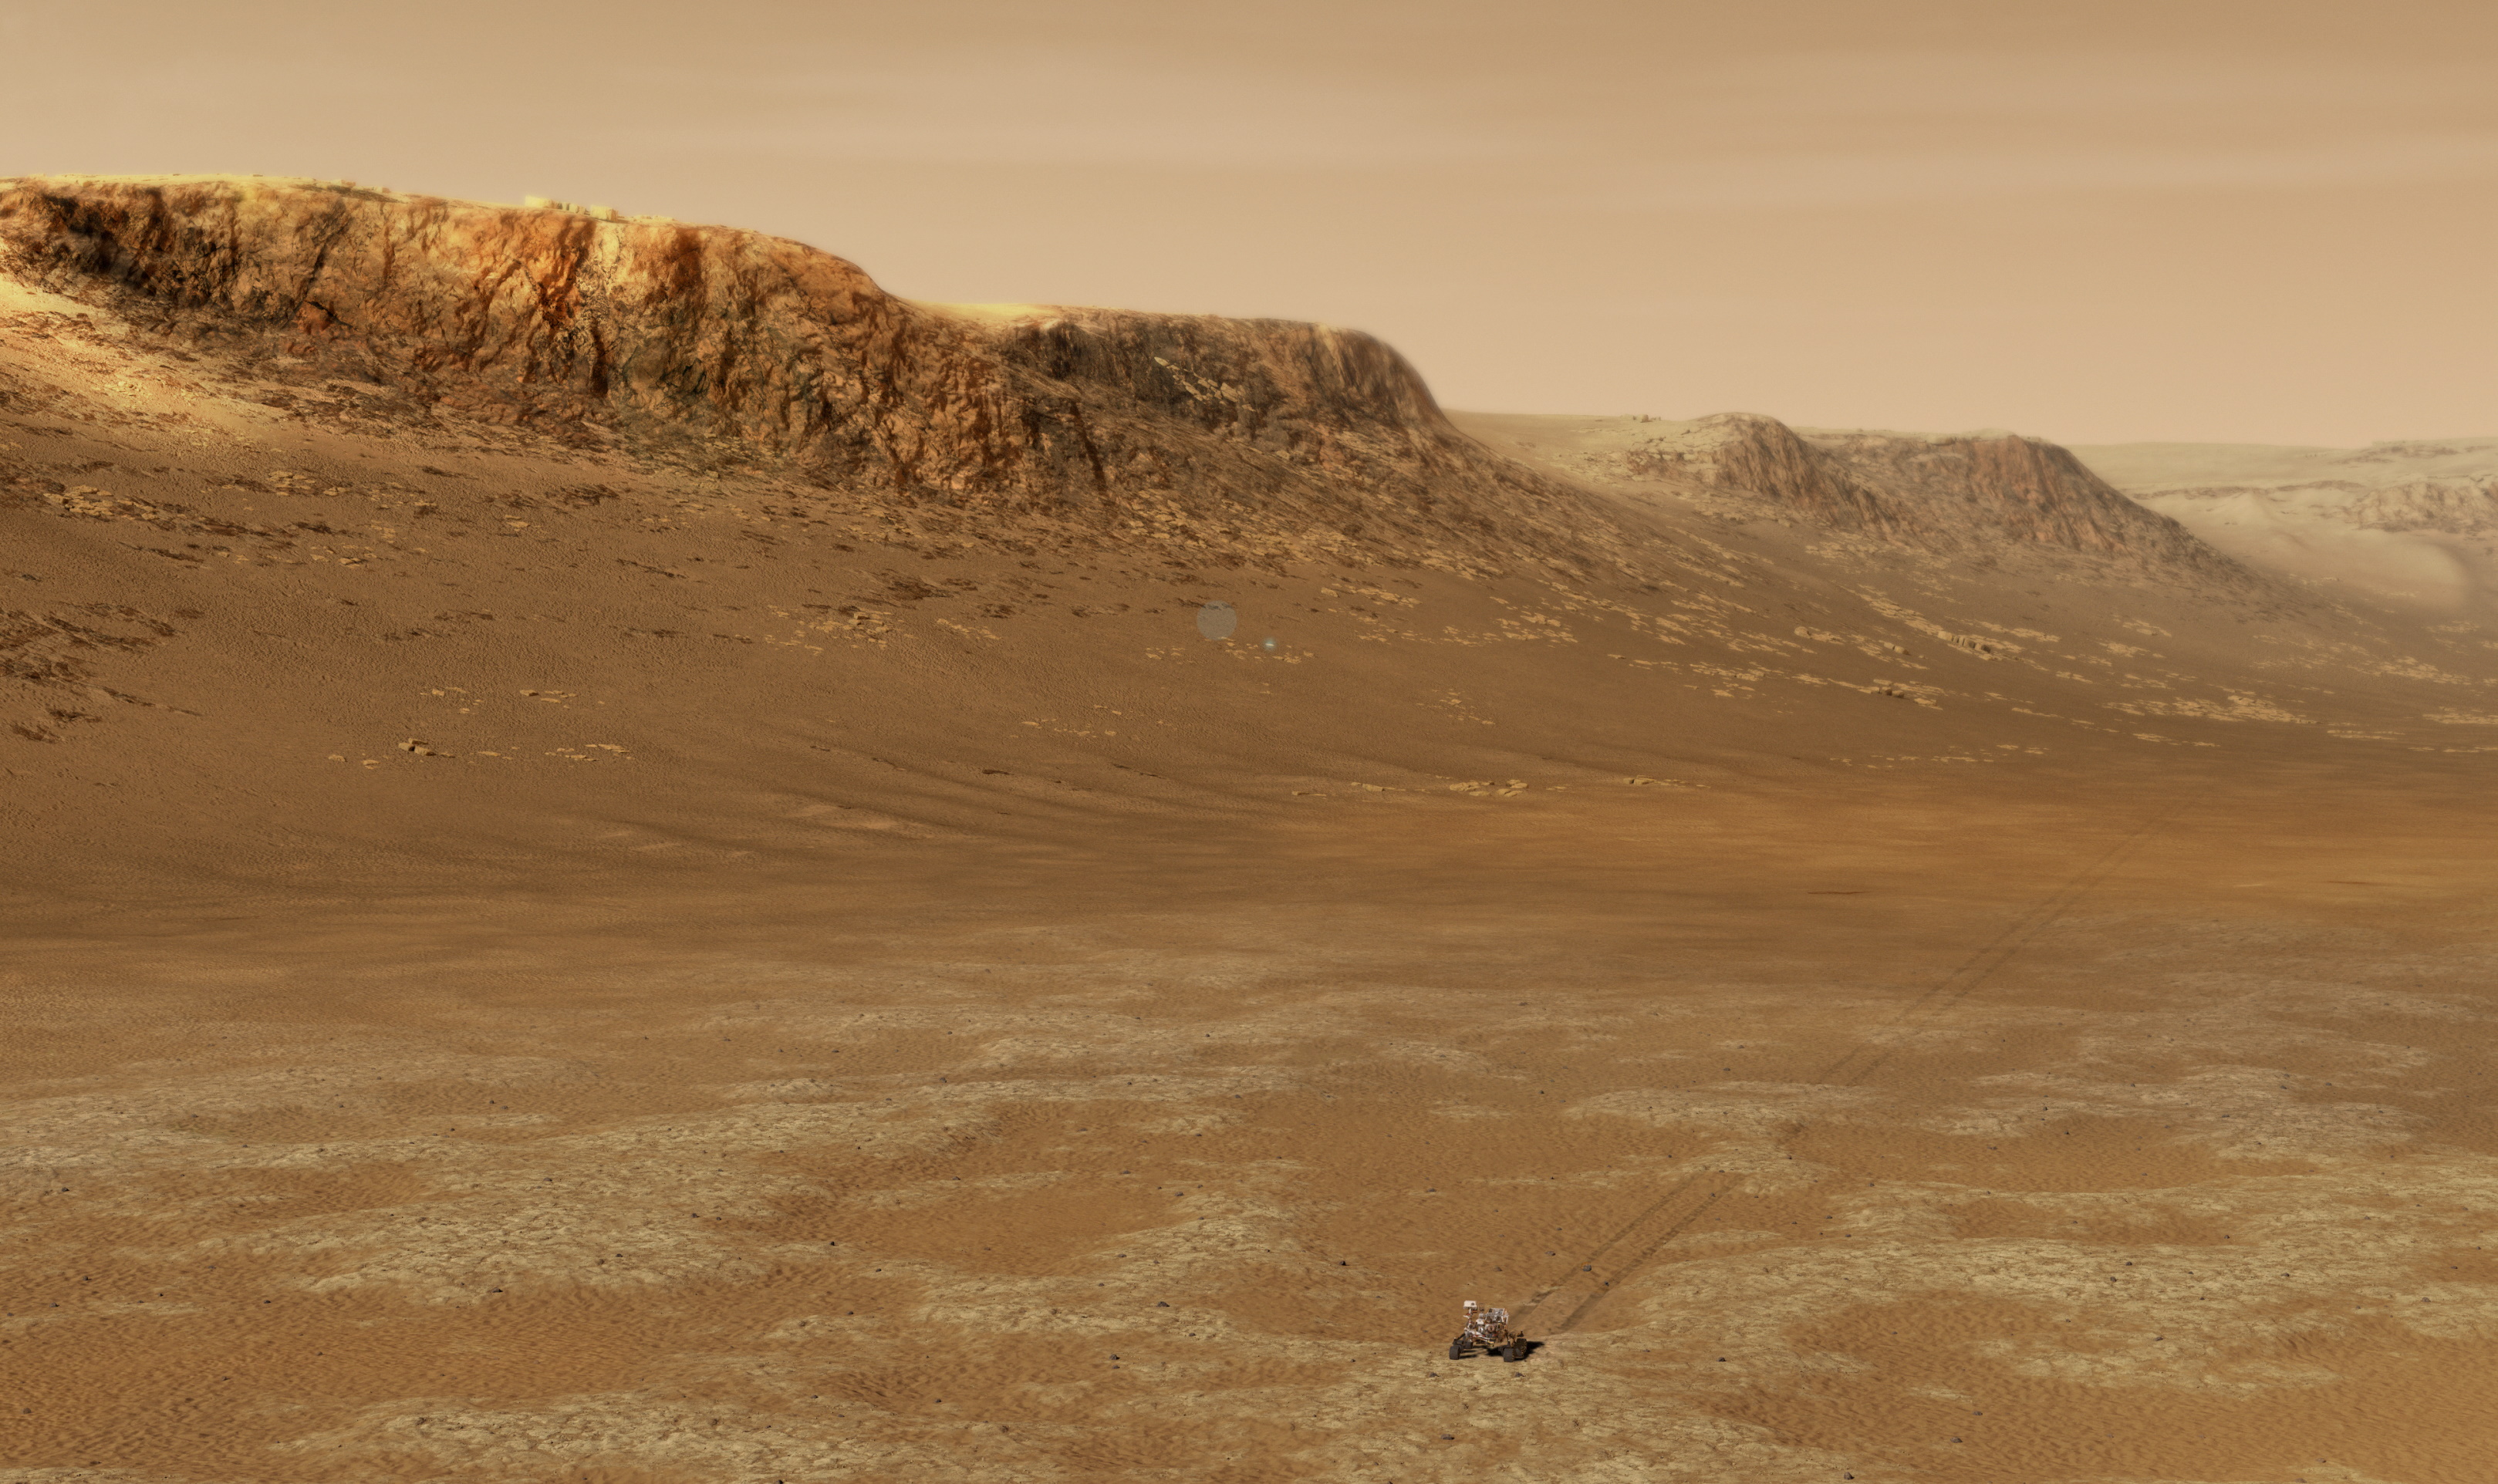 Illustration of Perseverance very small against a Martian landscape.